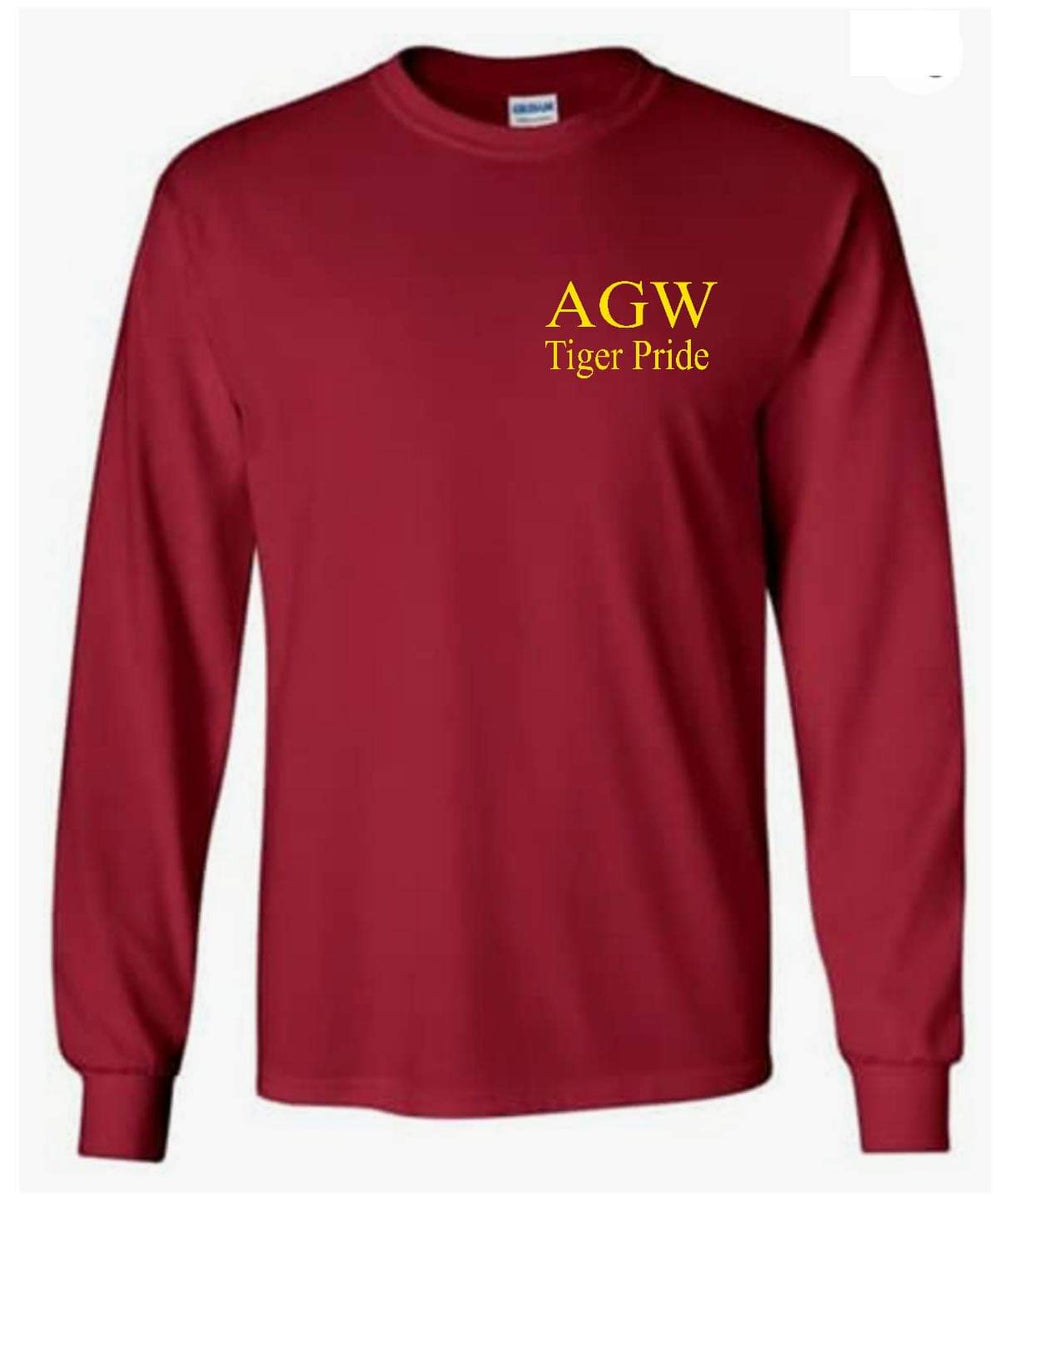 Maroon Long Sleeve Shirt with AGWTP embroidery in yellow gold thread